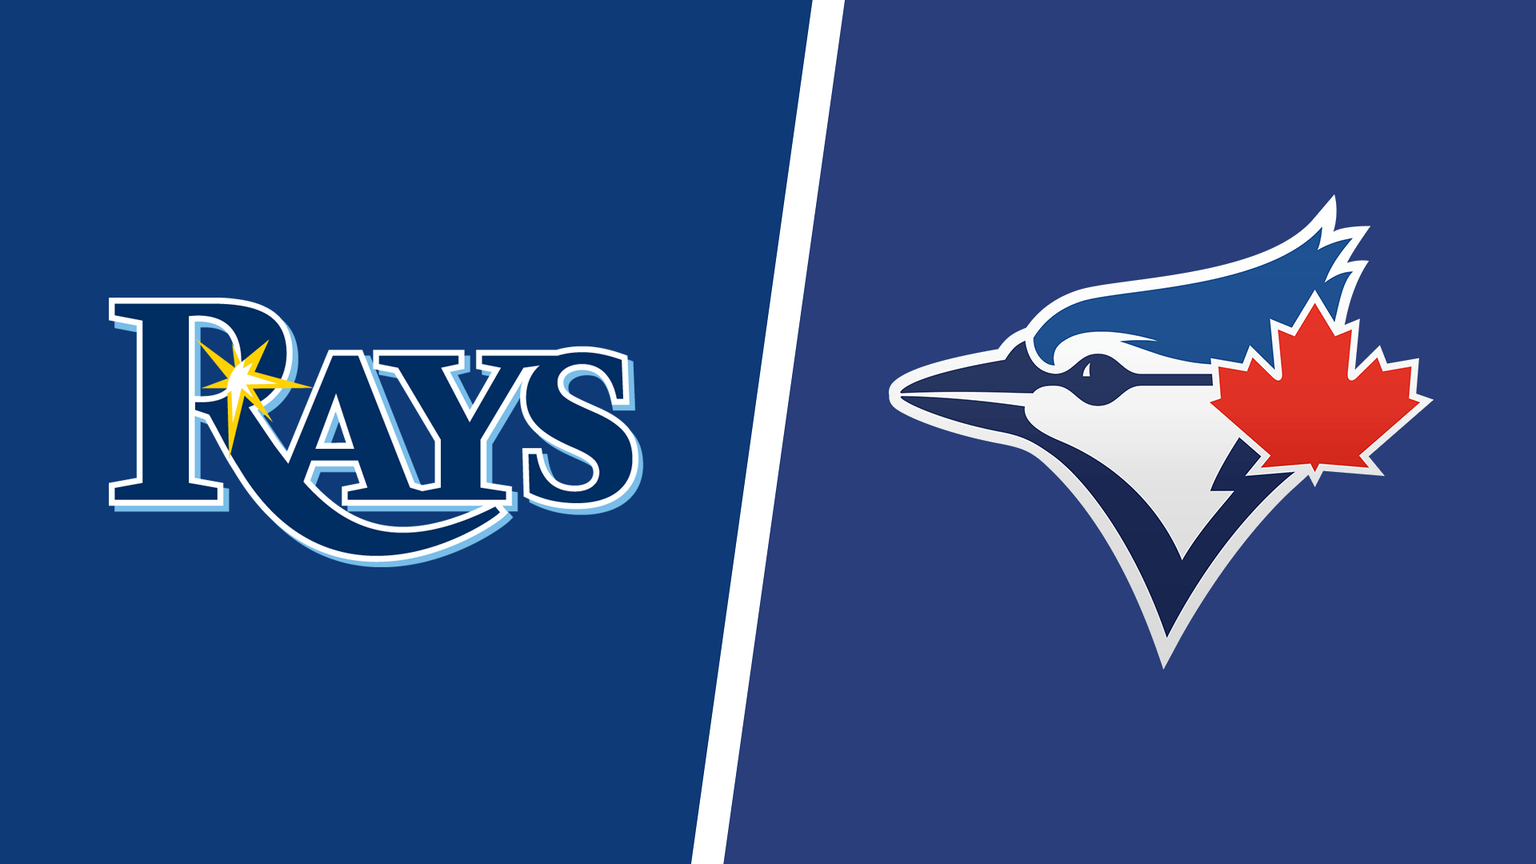 MLB TV Guide How to Watch Toronto Blue Jays vs. Tampa Bay Rays Live